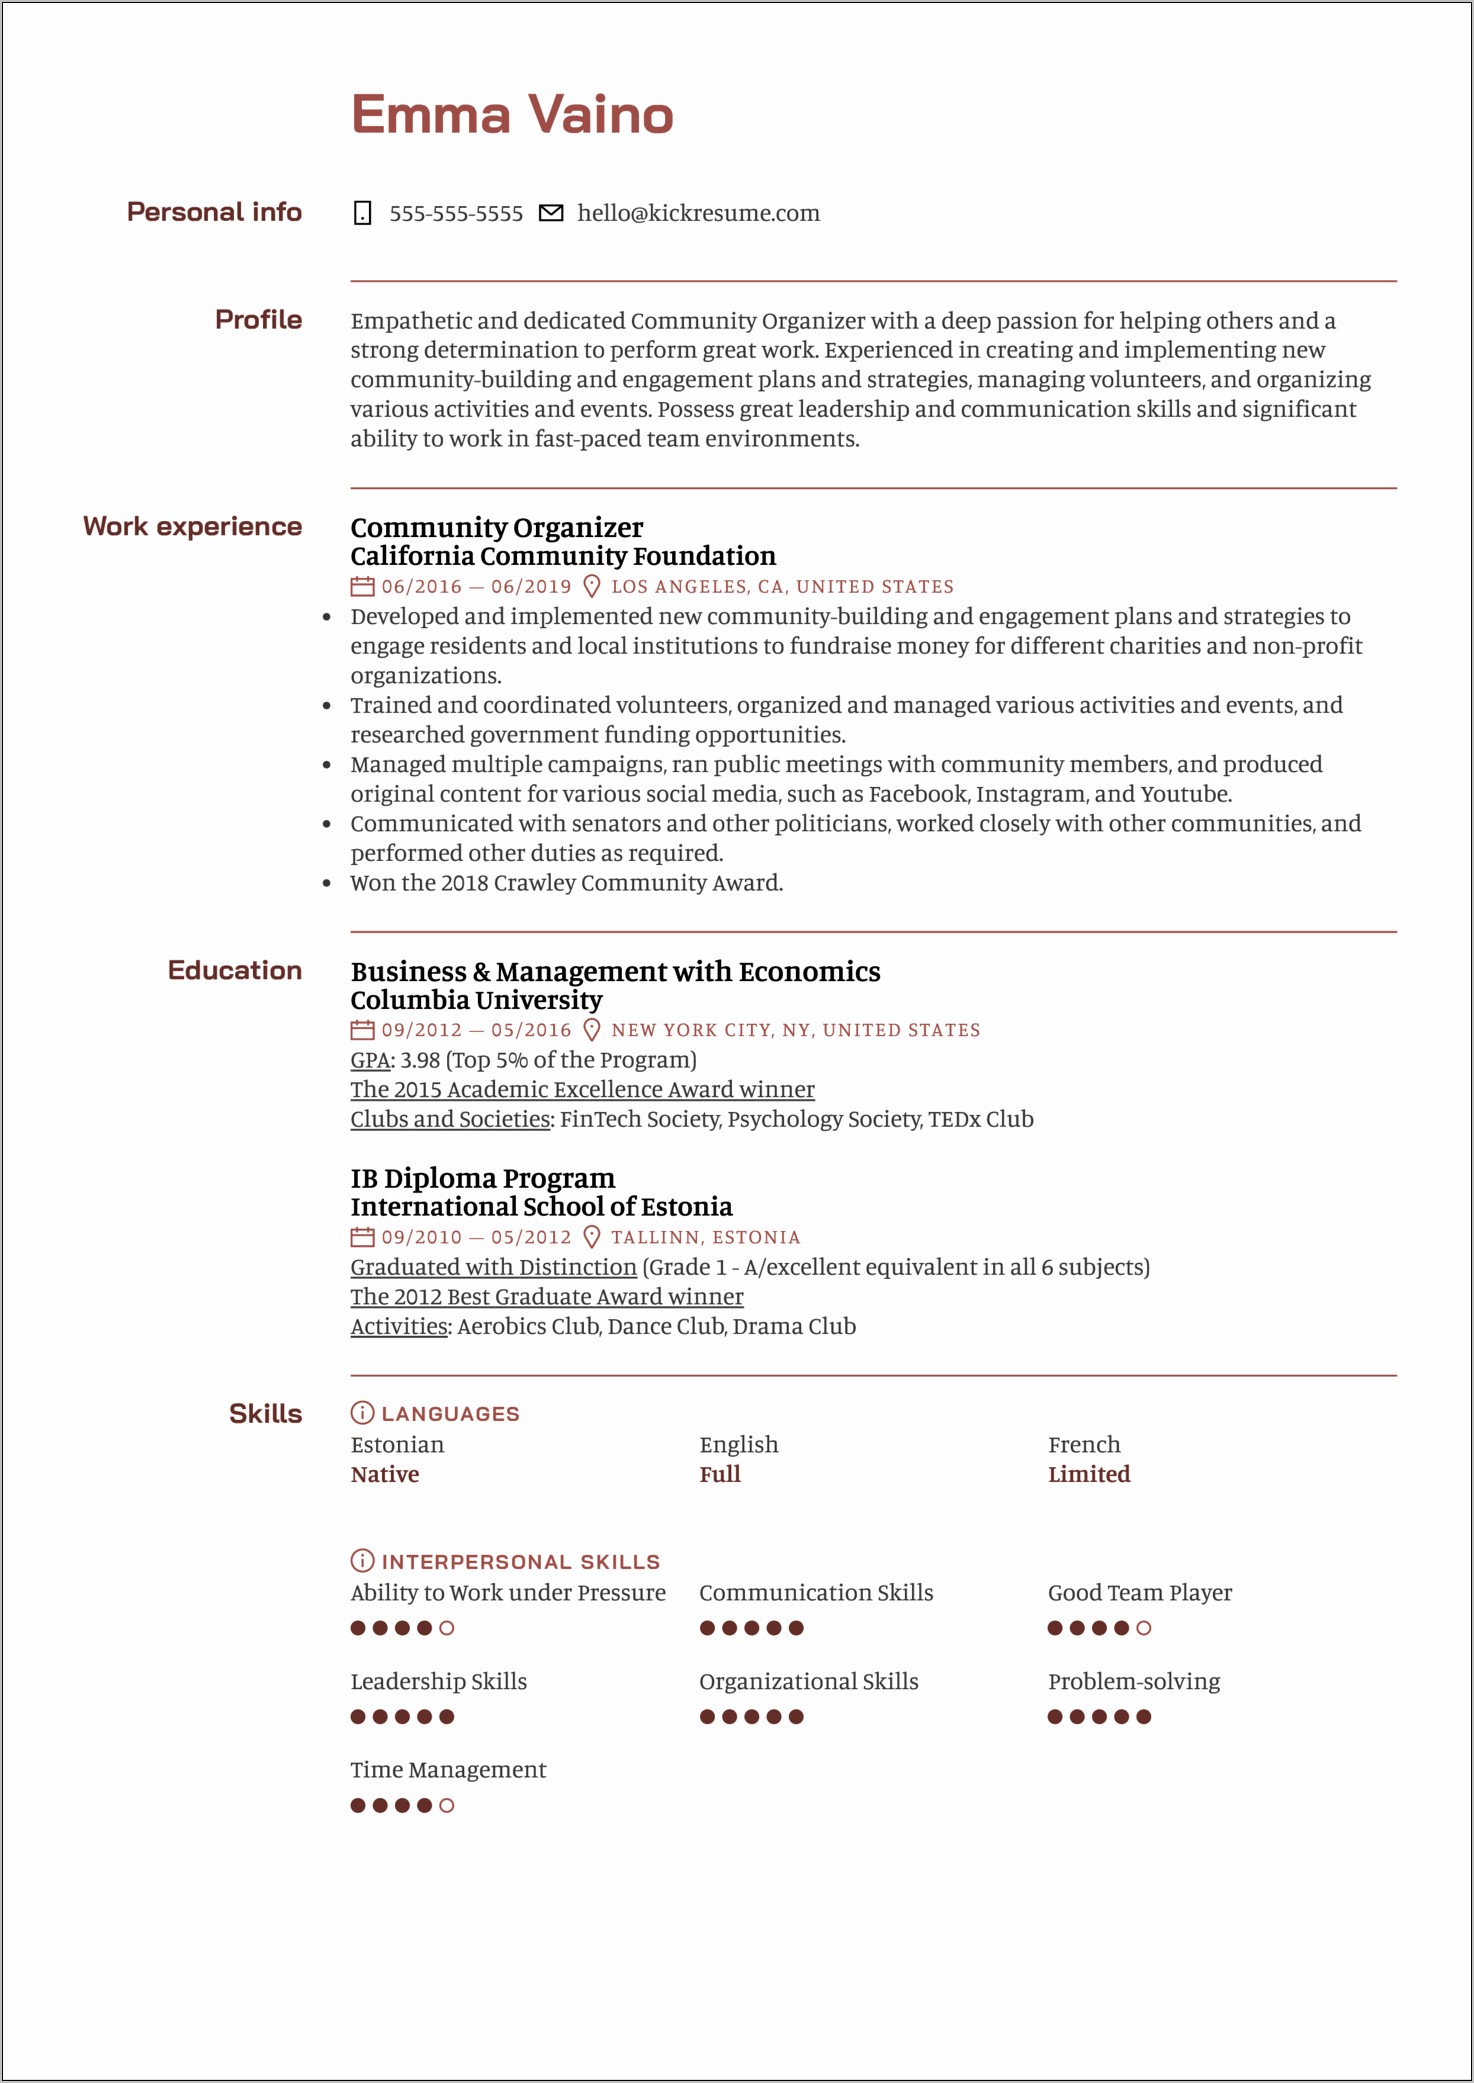 Best Program To Use For Resume